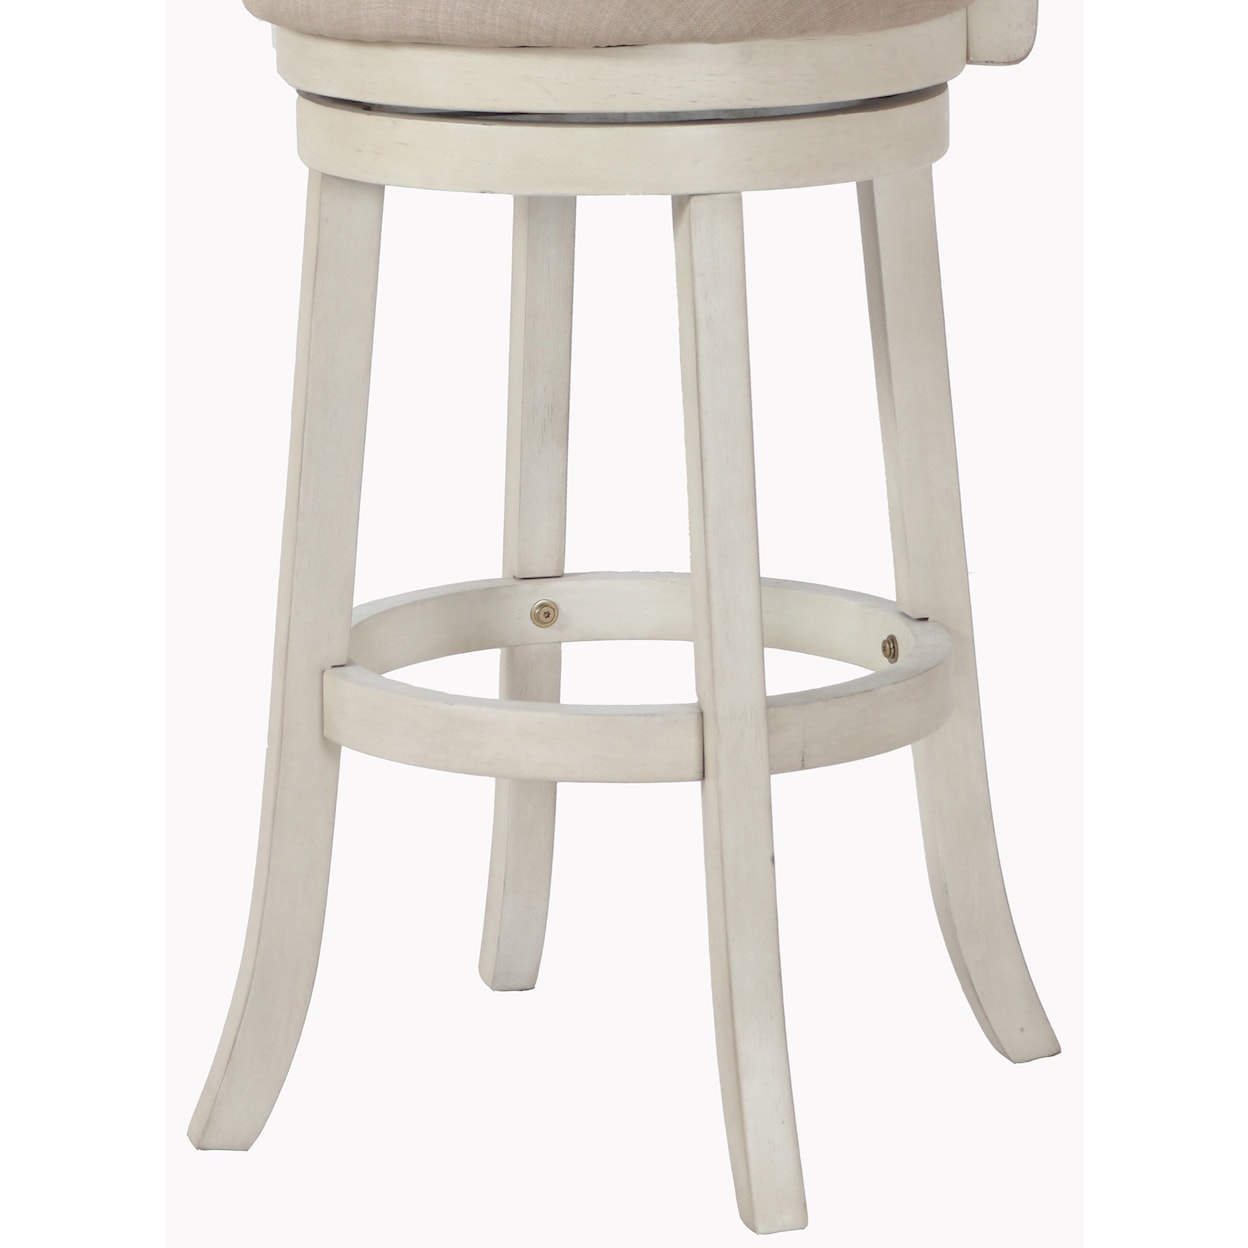 New Classic Furniture York 29" Barstool with Fabric Seat